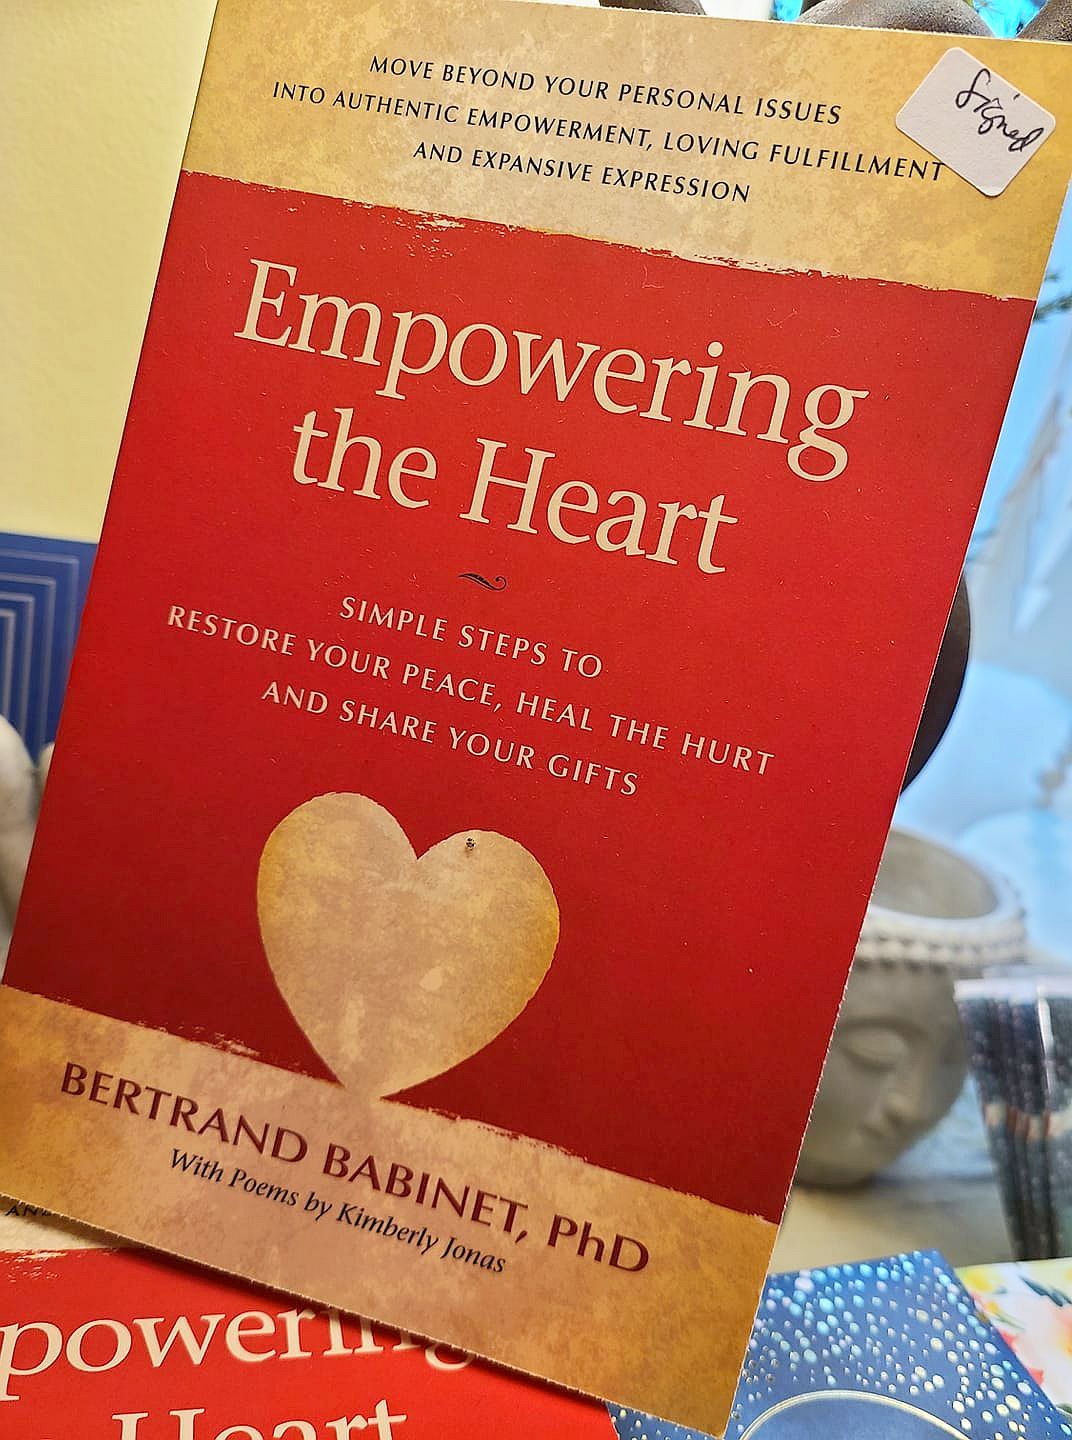 Empowering the Heart